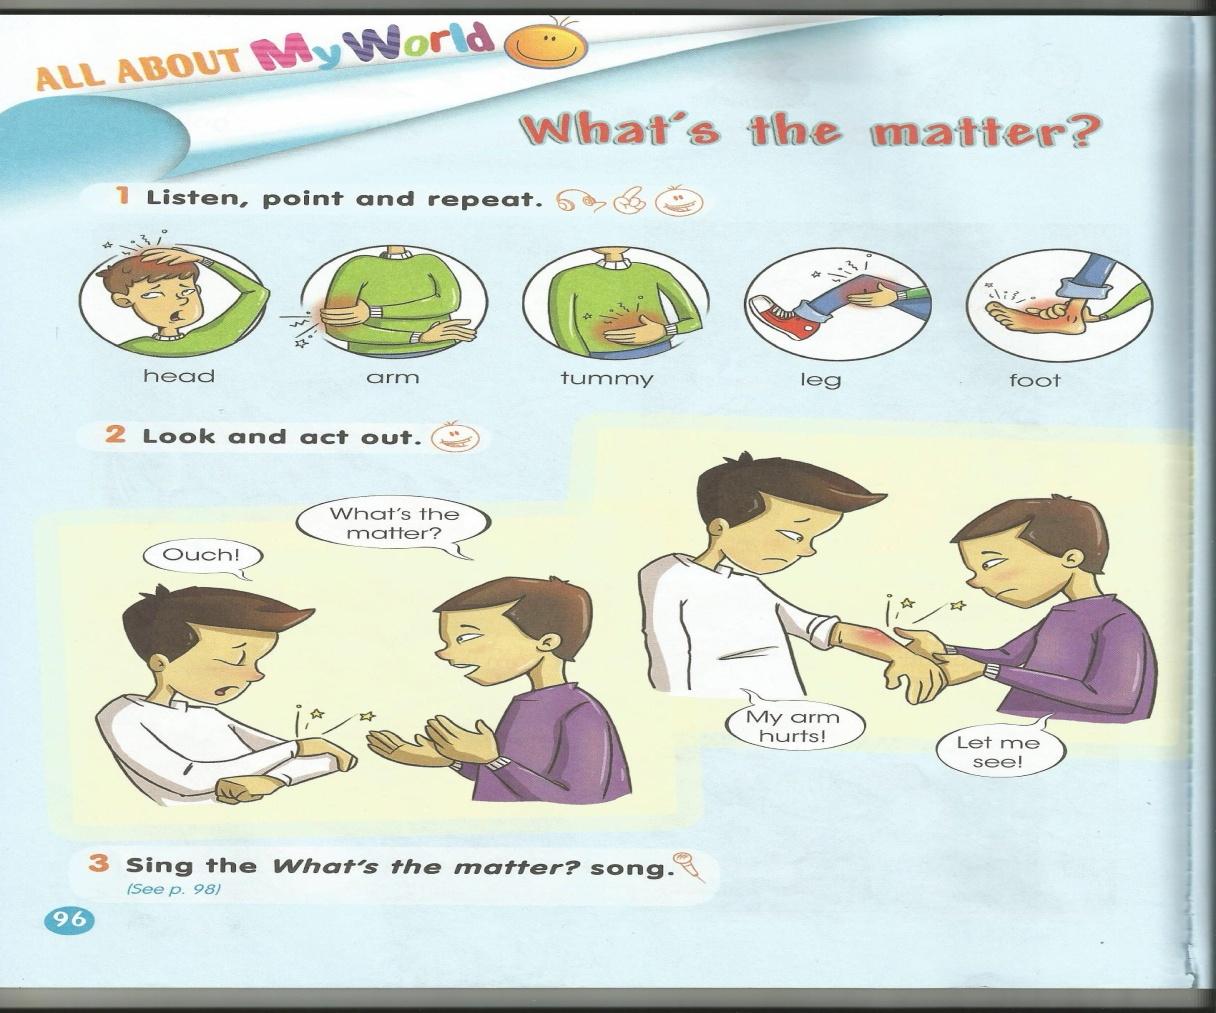 Act out similar dialogues. What is matter?. What's the matter правило. What's the matter for Kids. What's the matter Flashcards.